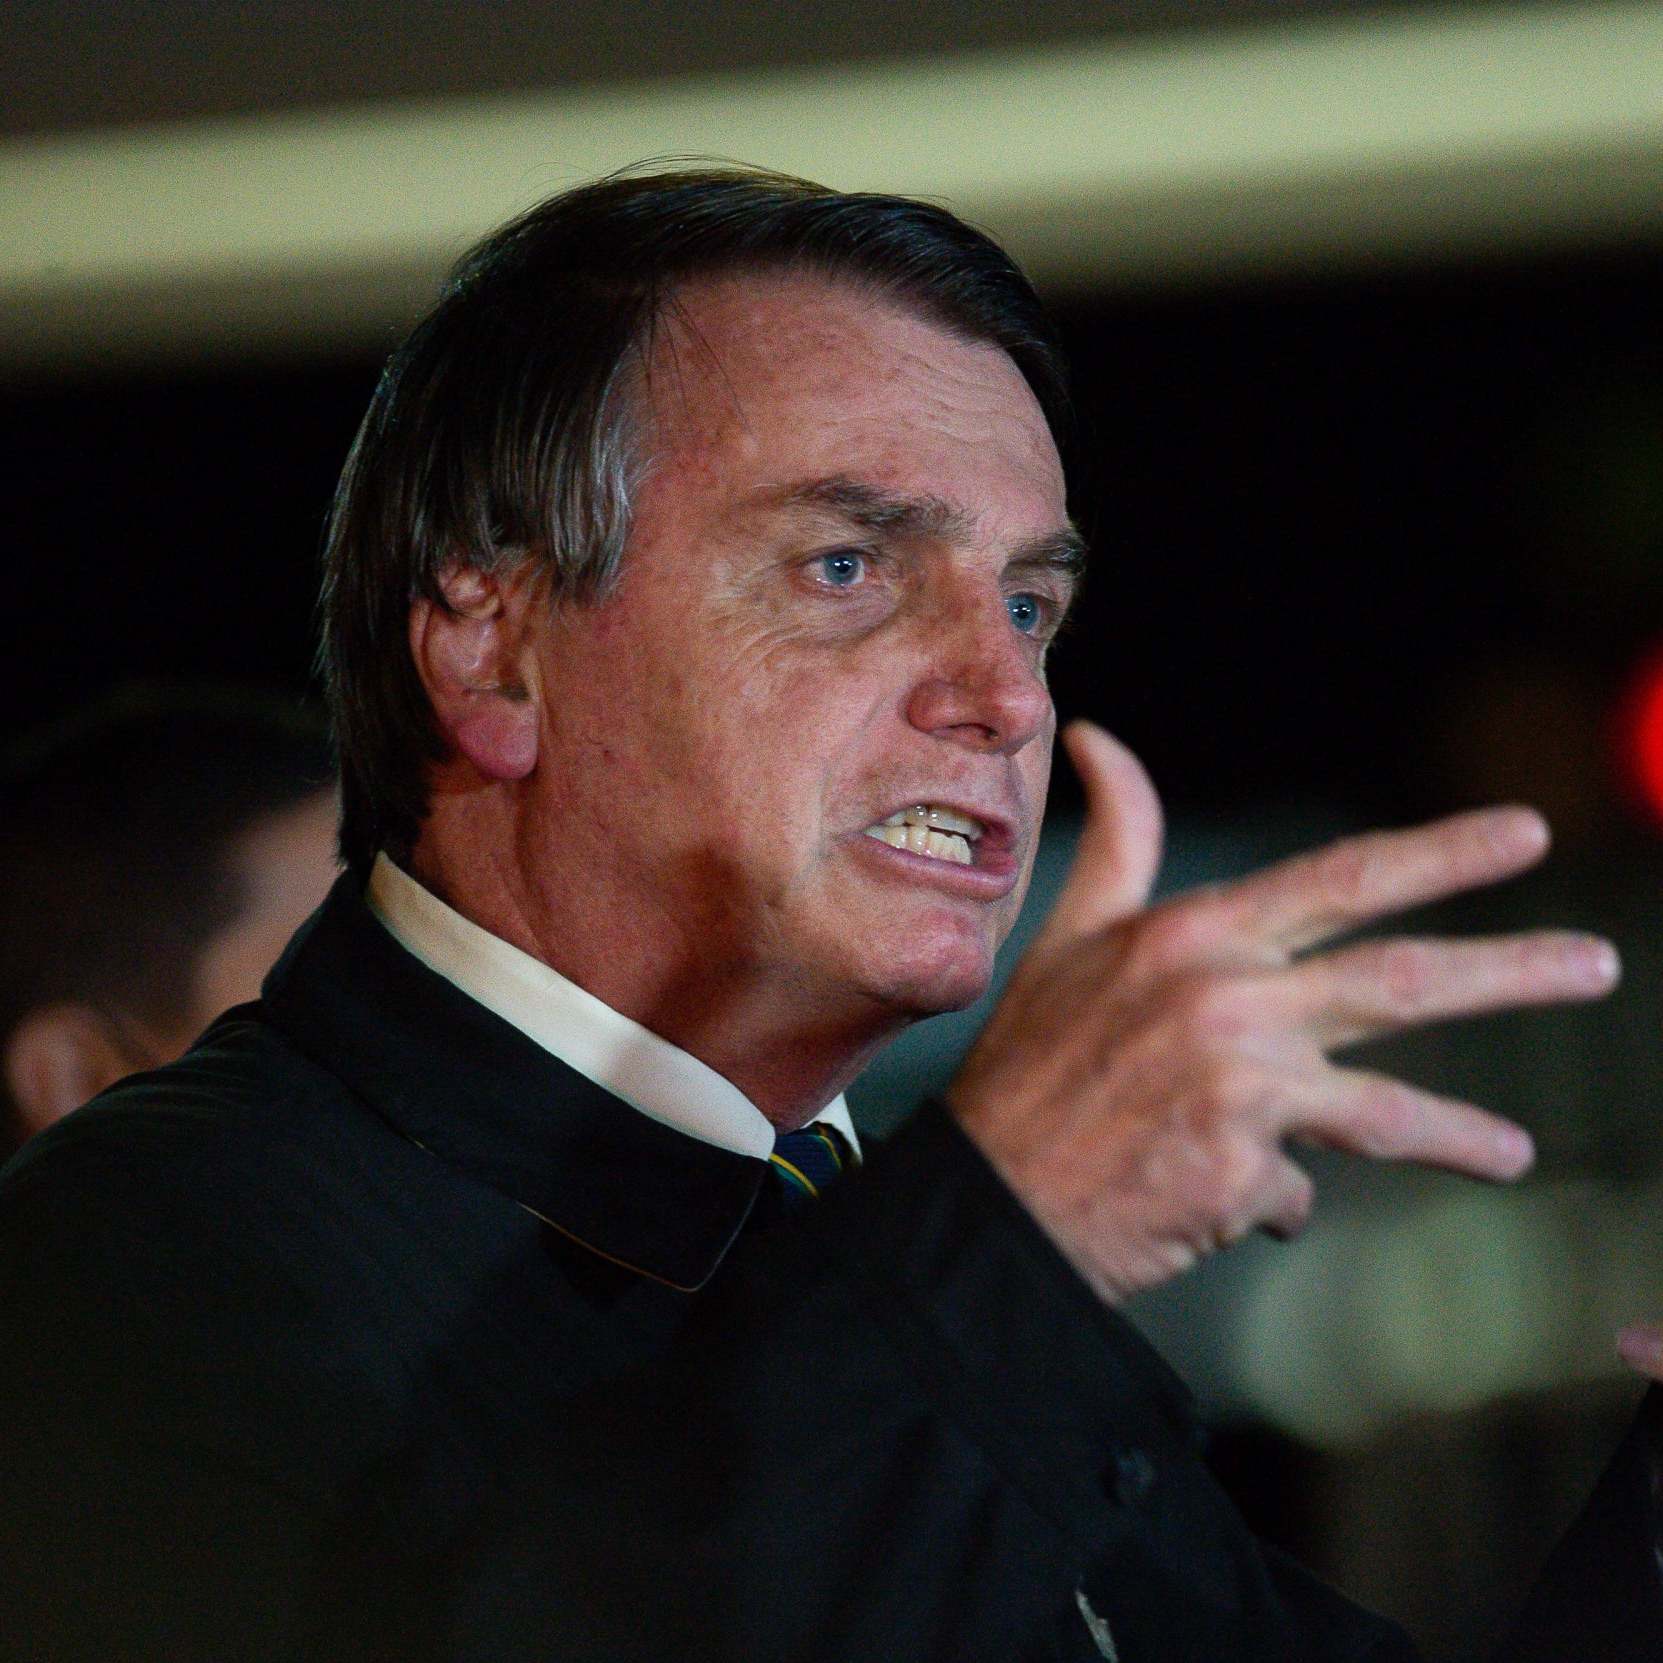 Bolsonaro has committed to lowering crime rate – pledging an all-out war against criminals